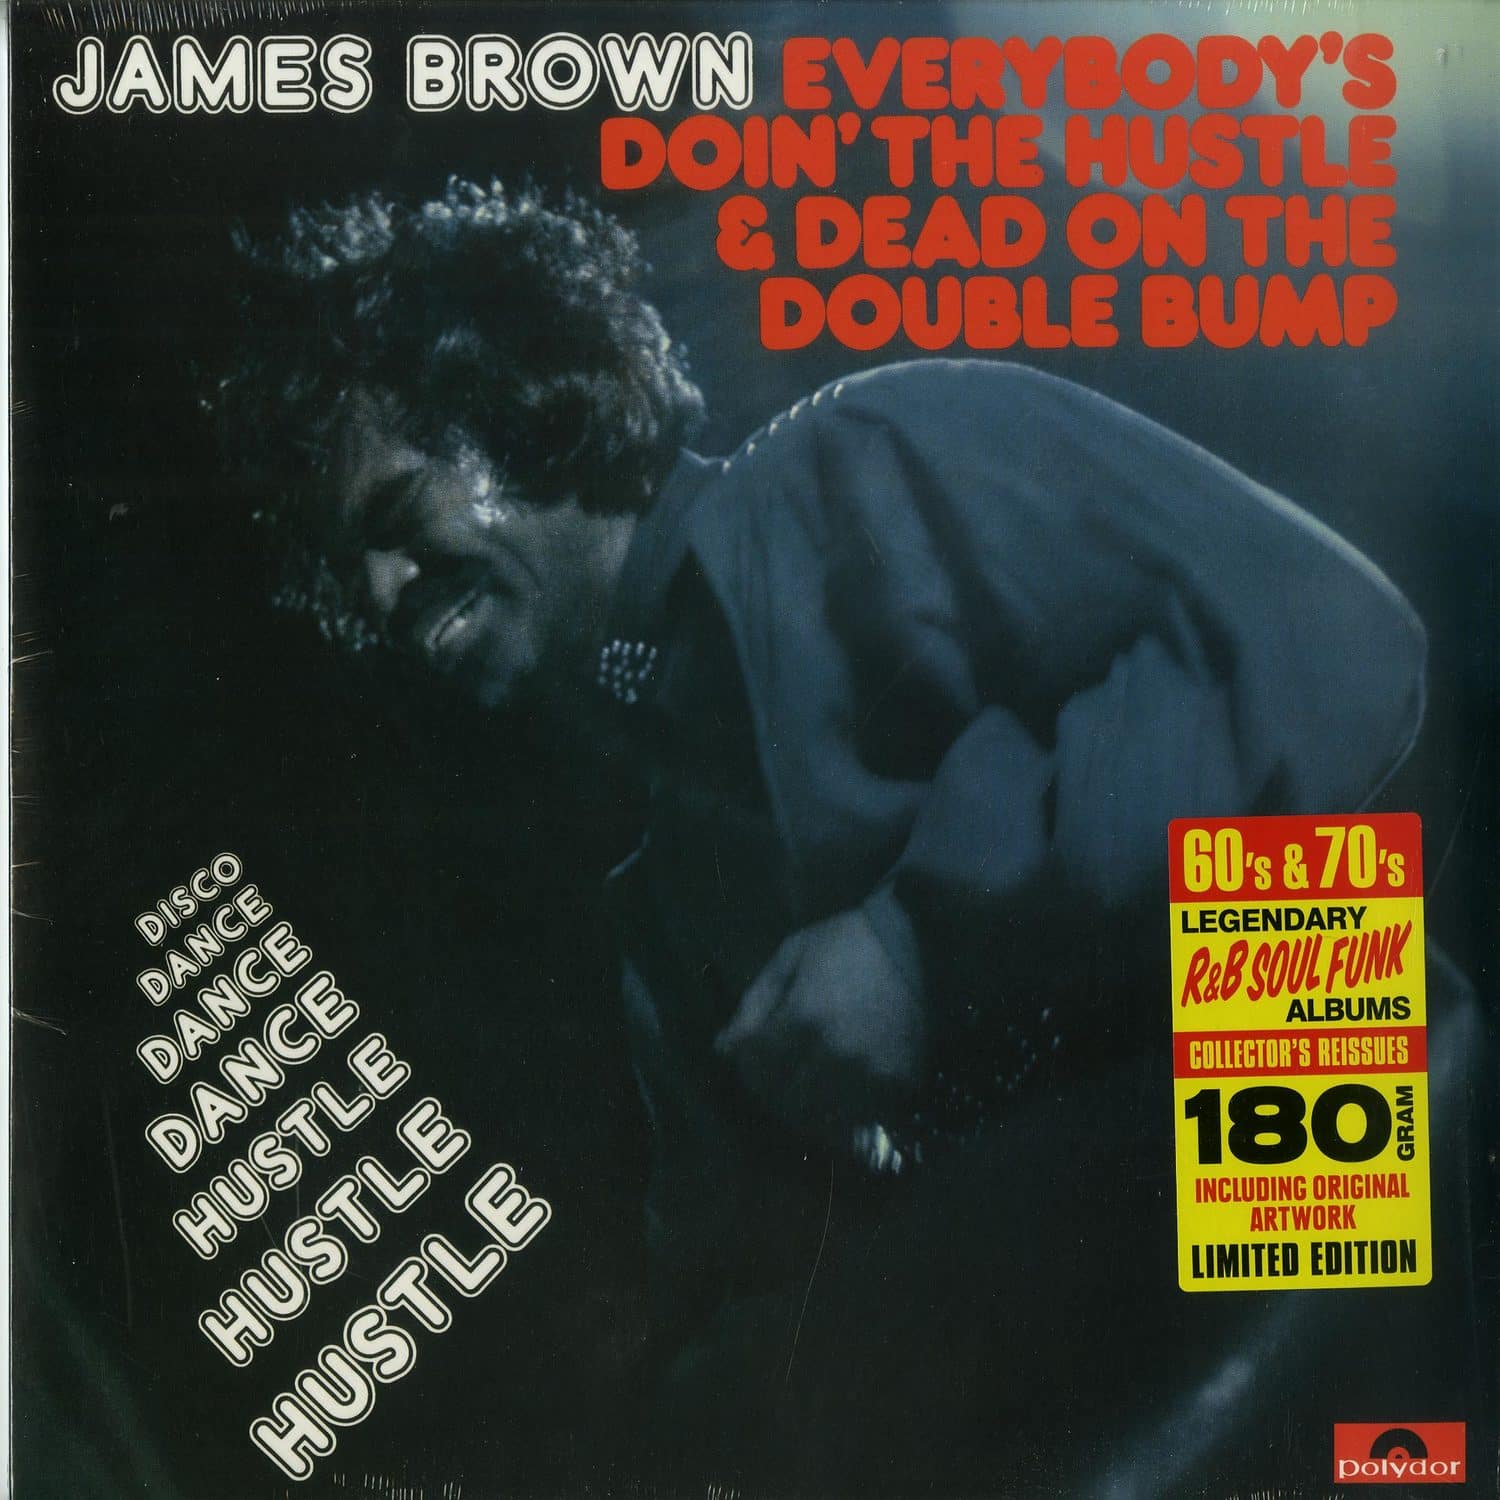 James Brown - EVERYBODYS DOIN THE HUSTLE & DEAD ON THE DOUBLE BUMP